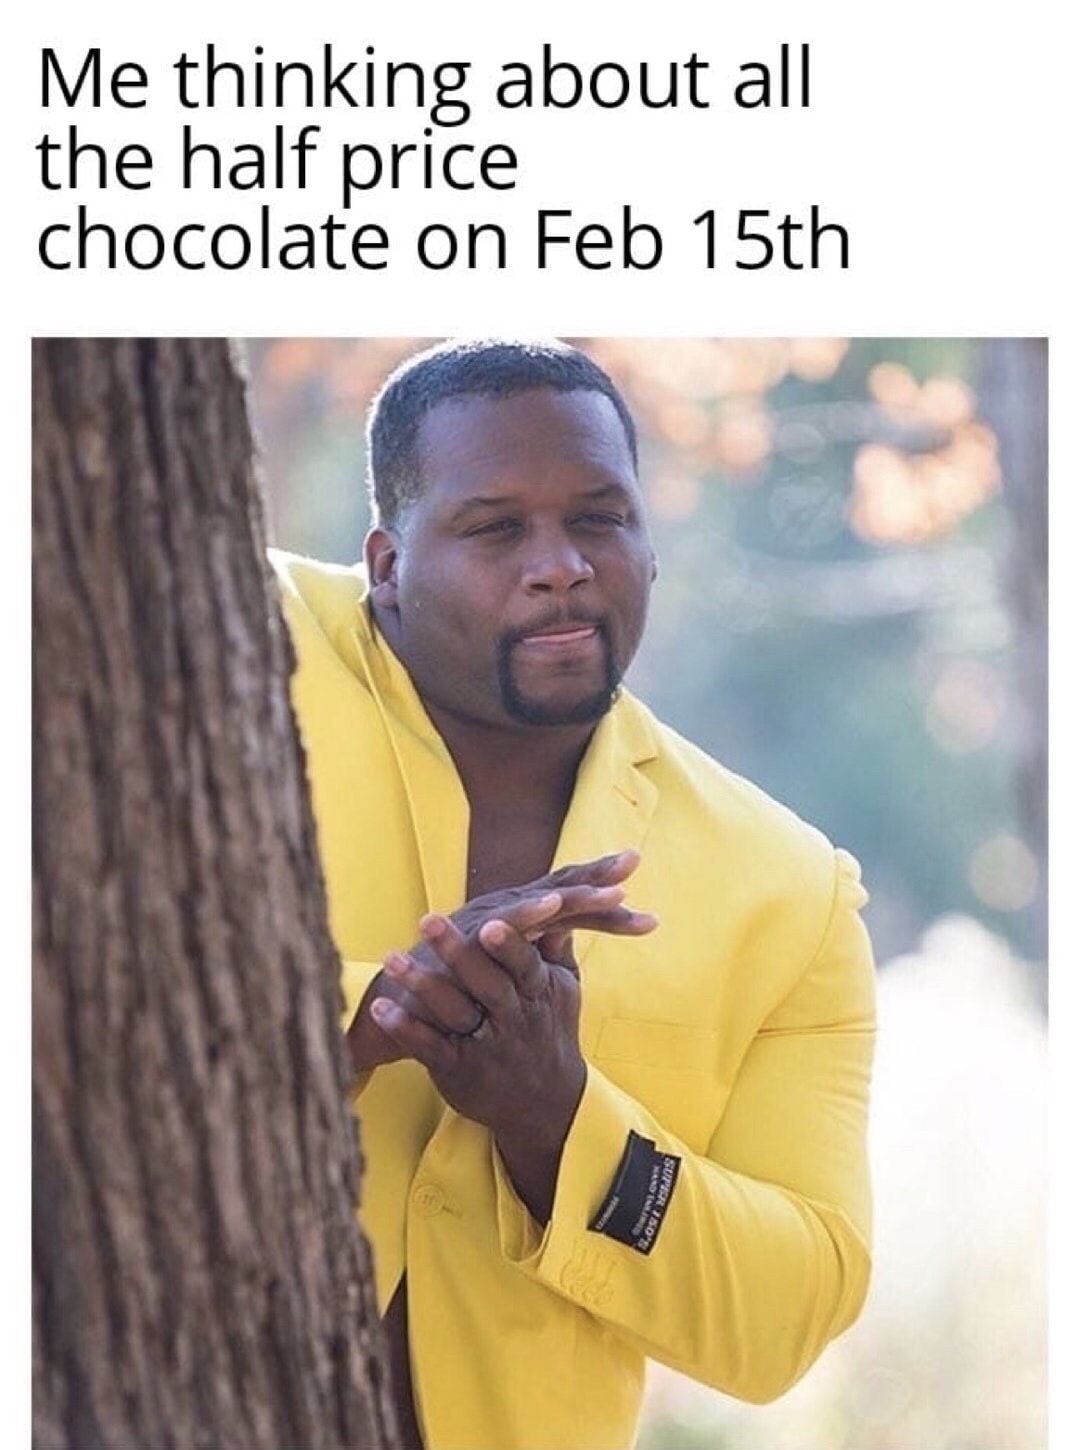 wuhan memes - Me thinking about all the half price chocolate on Feb 15th